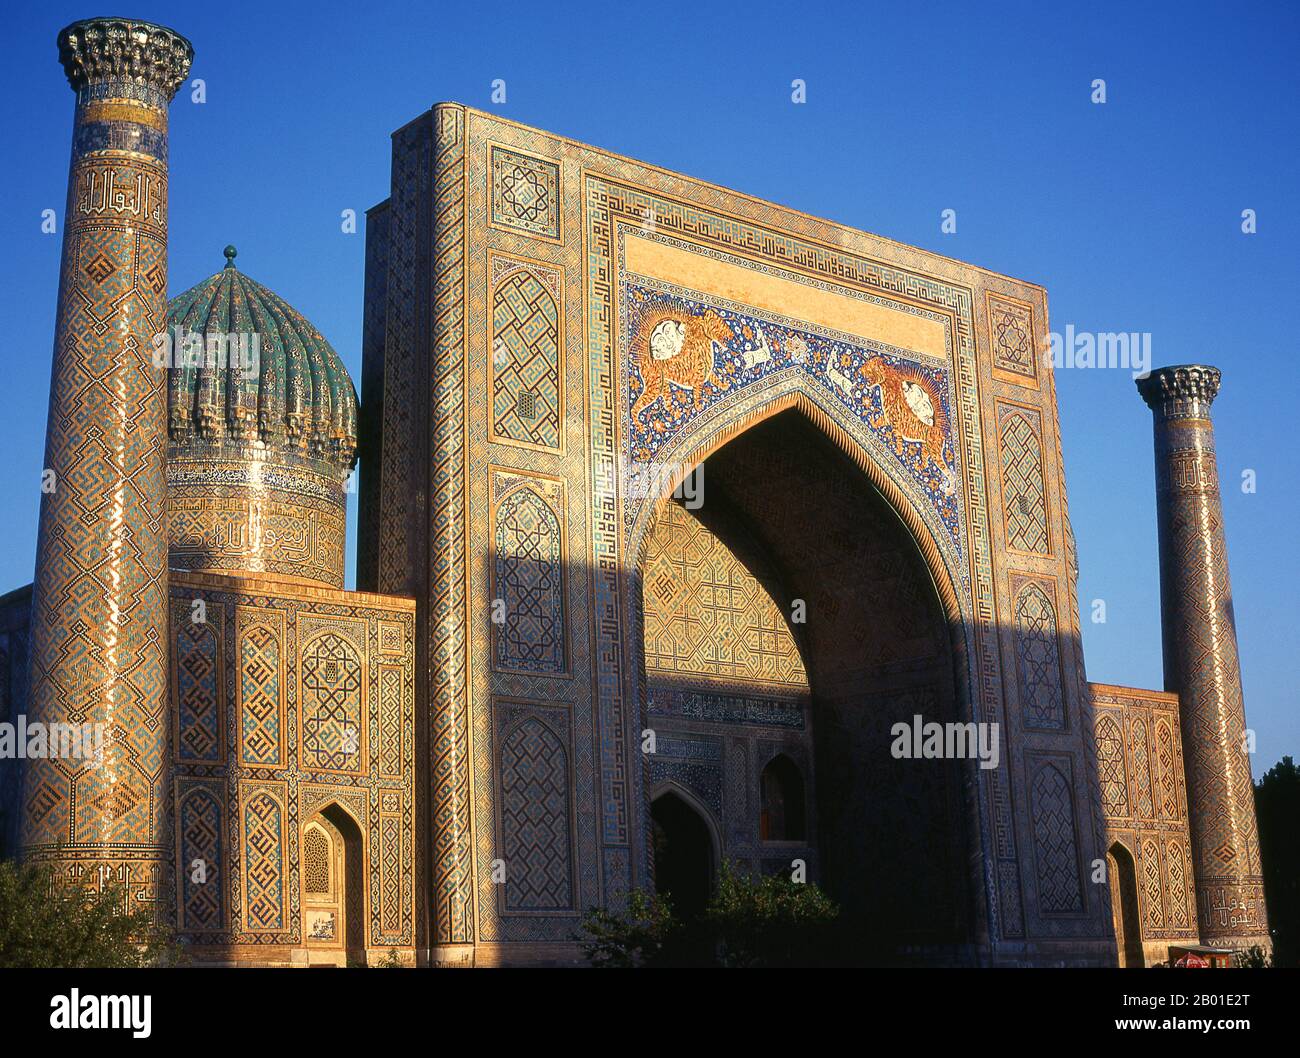 Uzbekistan: Minaret, fluted dome and portico at Sher Dor Madrassa, The Registan, Samarkand.  The Registan contains three madrasahs (schools), the Ulugh Beg Madrasah (1417–1420), Tilya-Kori Madrasah (1646–1660) and the Sher-Dor Madrasah (1619–1636).  In the 17th century the ruler of Samarkand Yalangtush Bakhodur ordered the construction of the Sher-Dor and Tillya-Kori madrasahs. The Sher-Dor (Having Tigers) Madrasah was designed by architect Abdujabor. The decoration of the madrasah is not as refined as that found on 15th century architecture, Samarkand's 'golden age'. Stock Photo